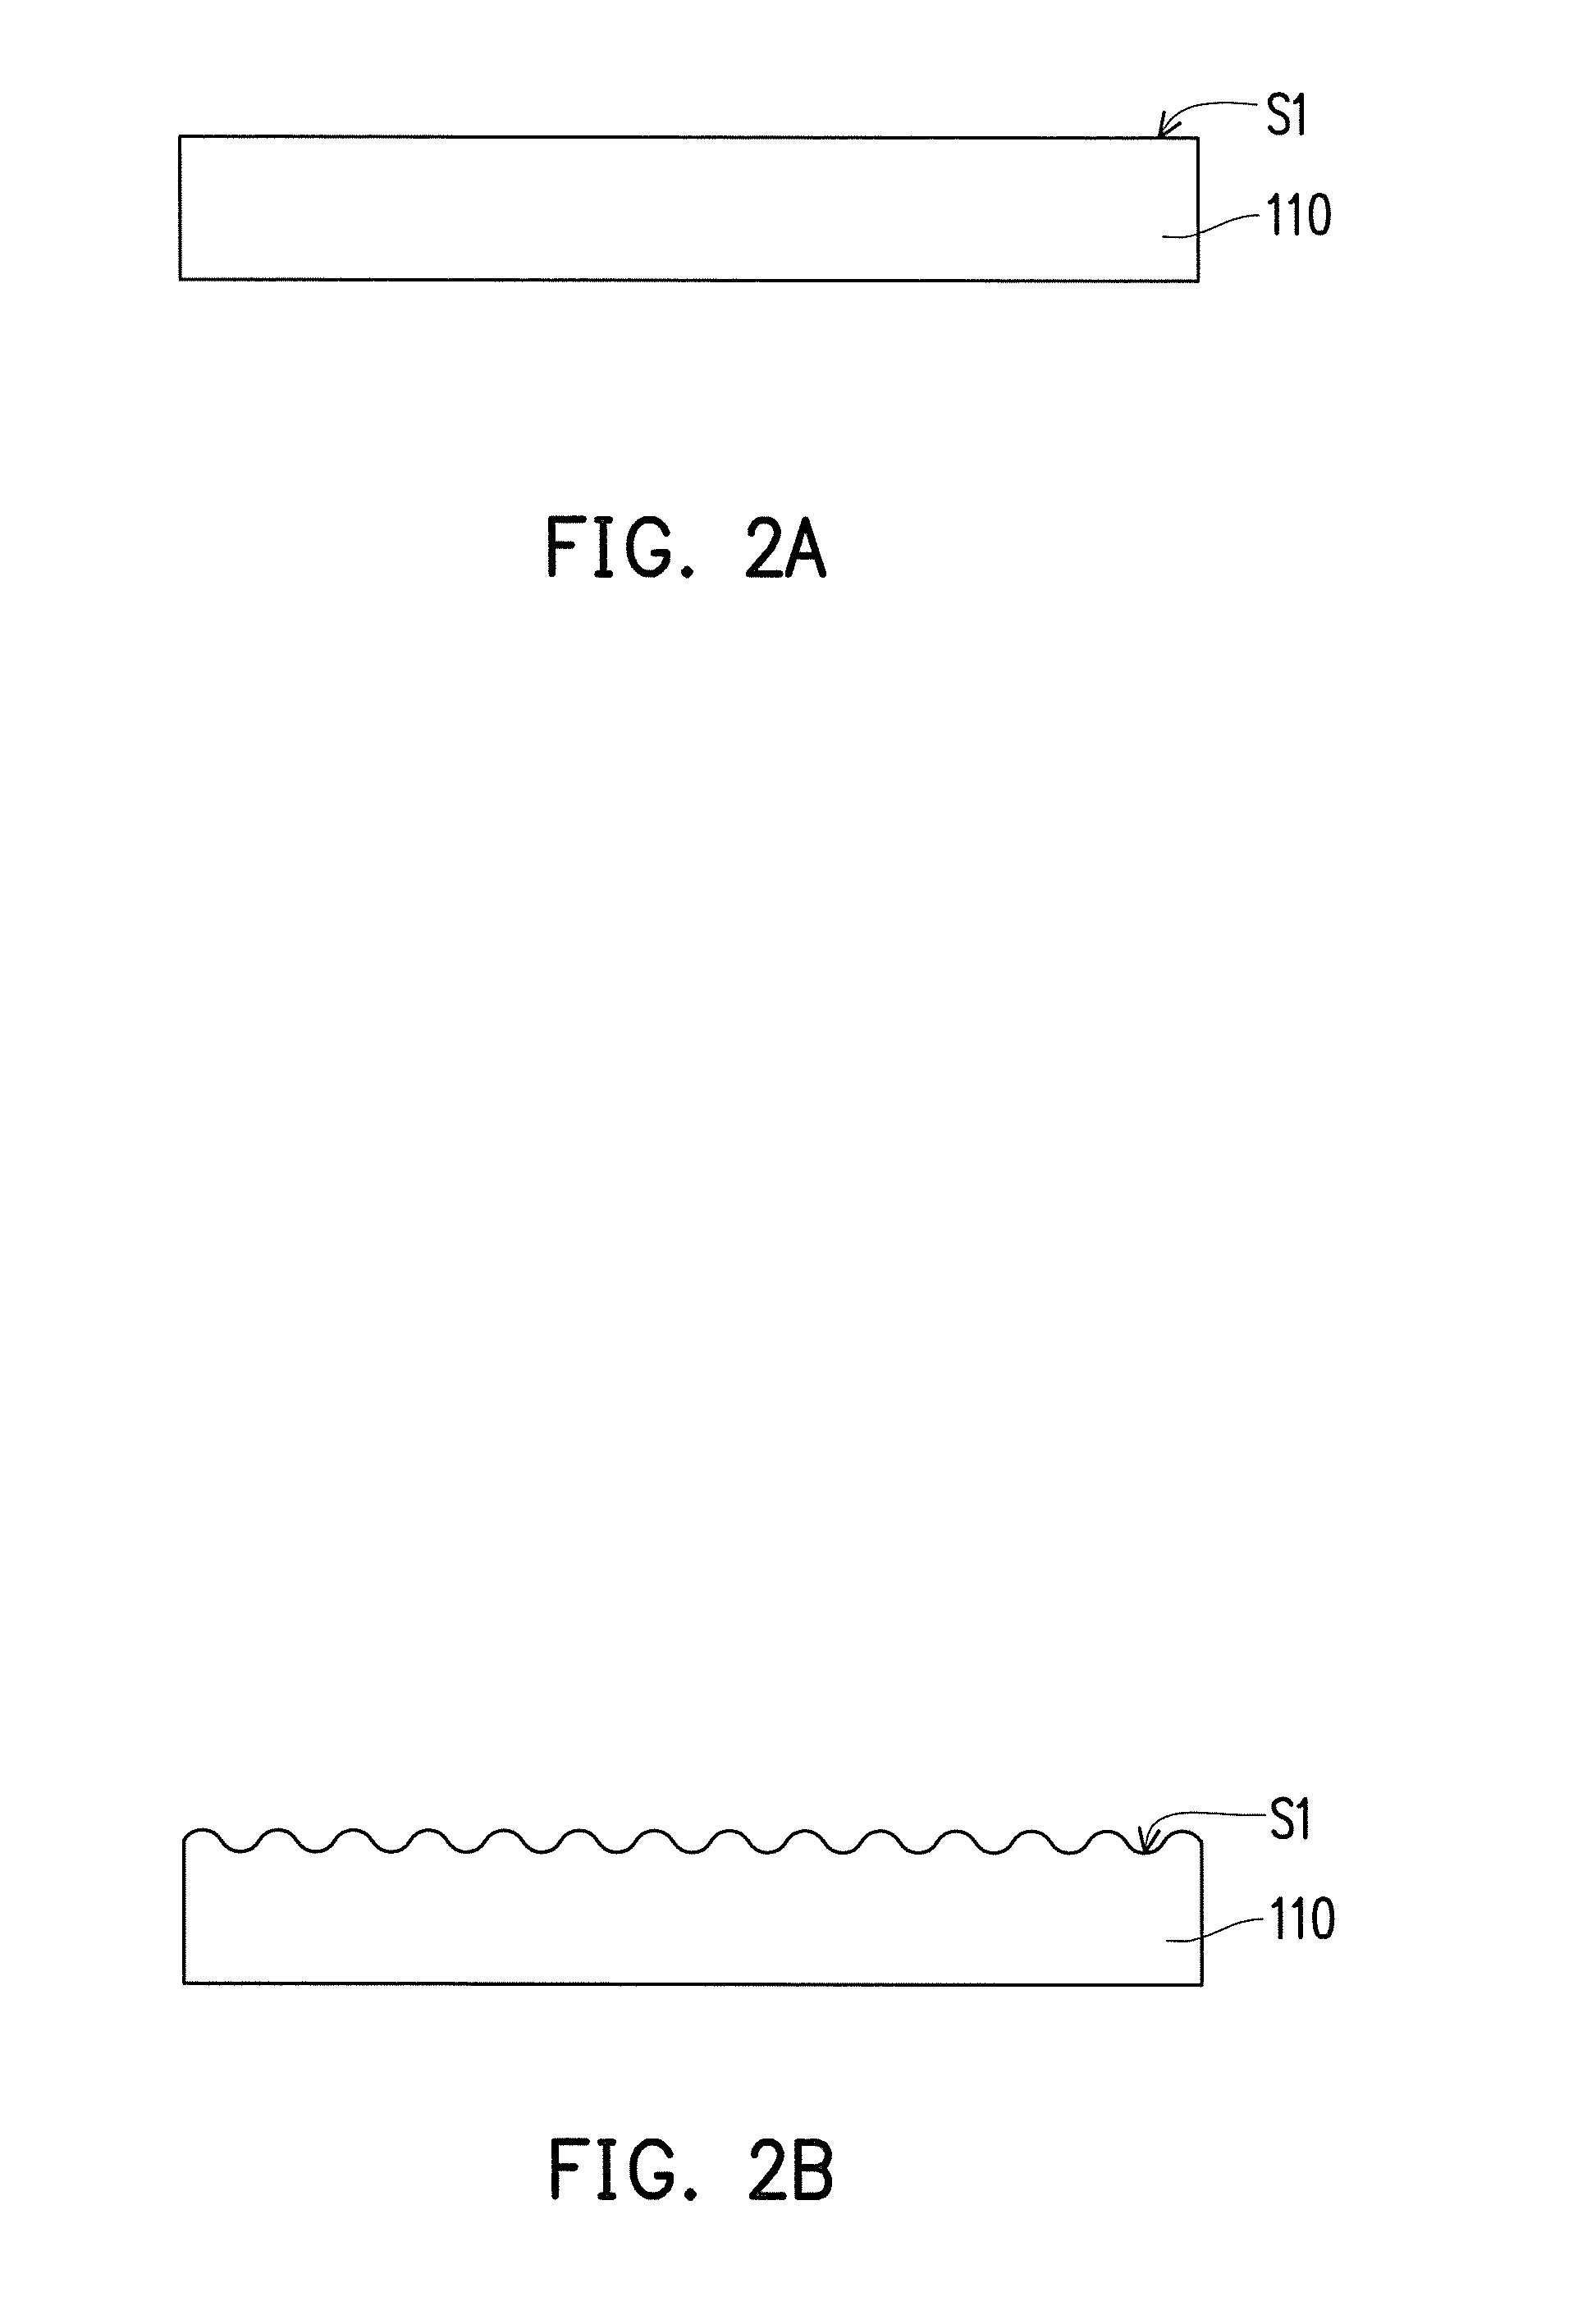 Casing of handheld electronic device and method of manufacturing the same